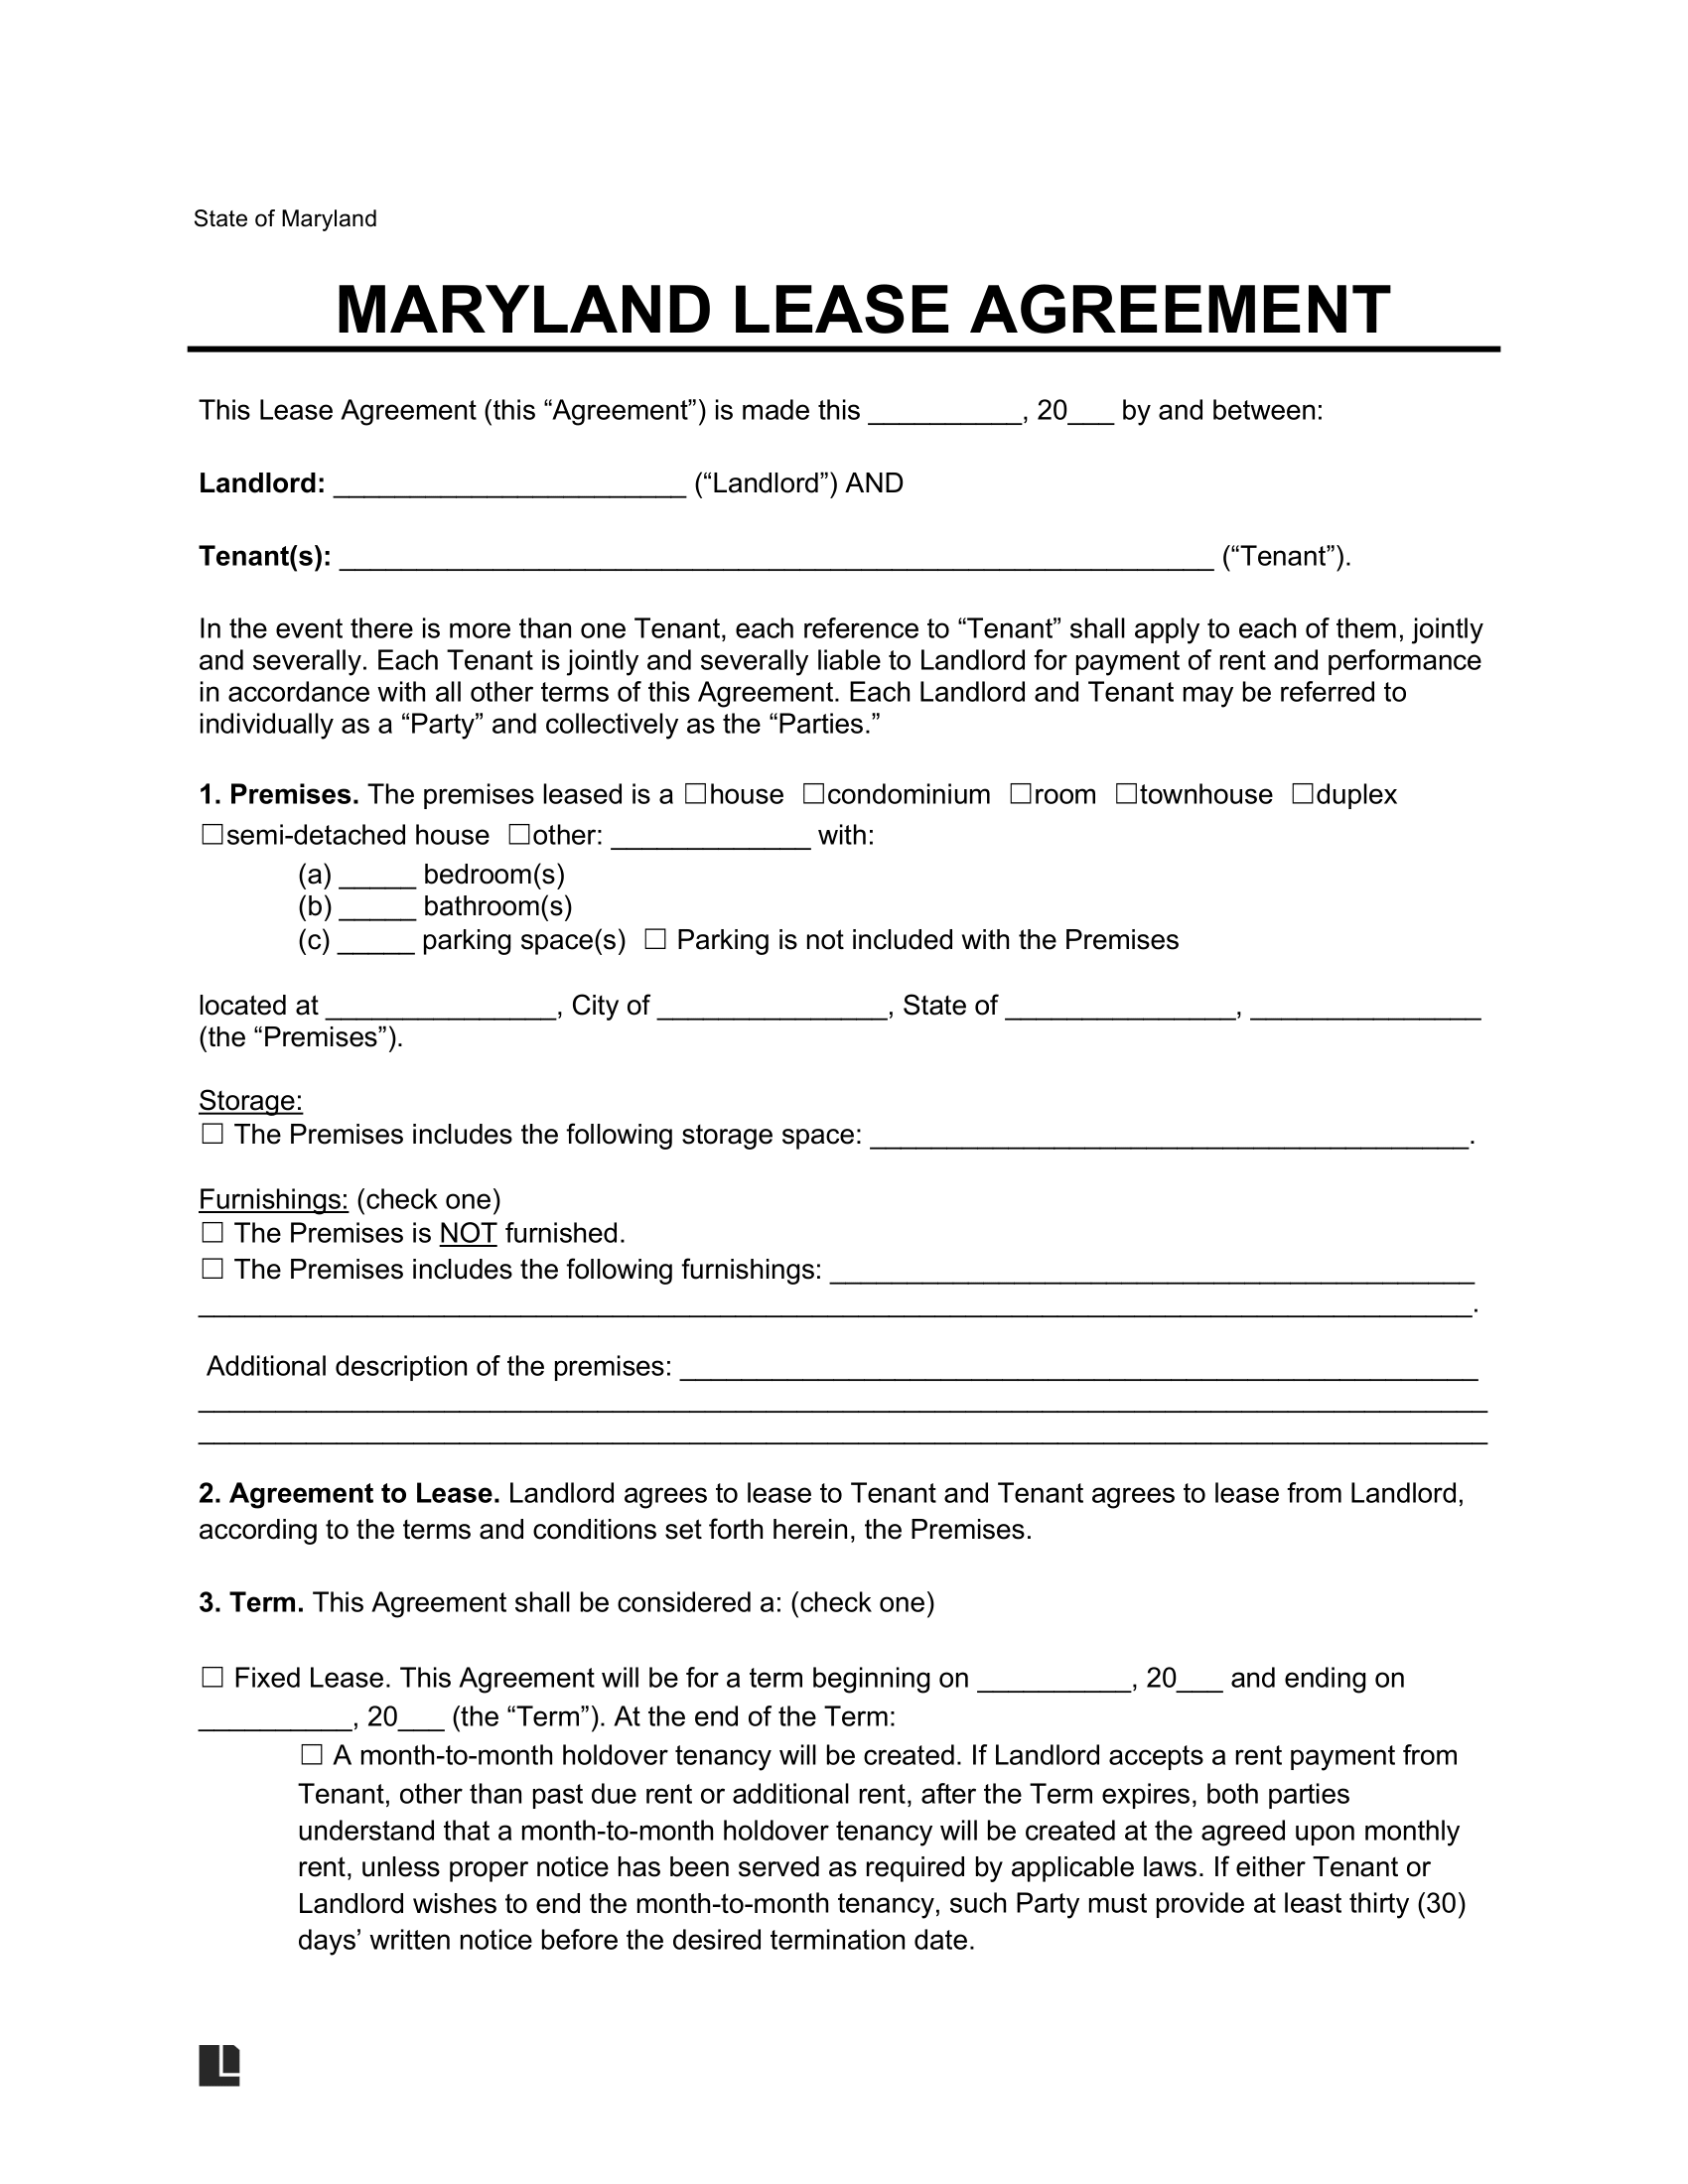 Maryland Residential Lease Agreement Template